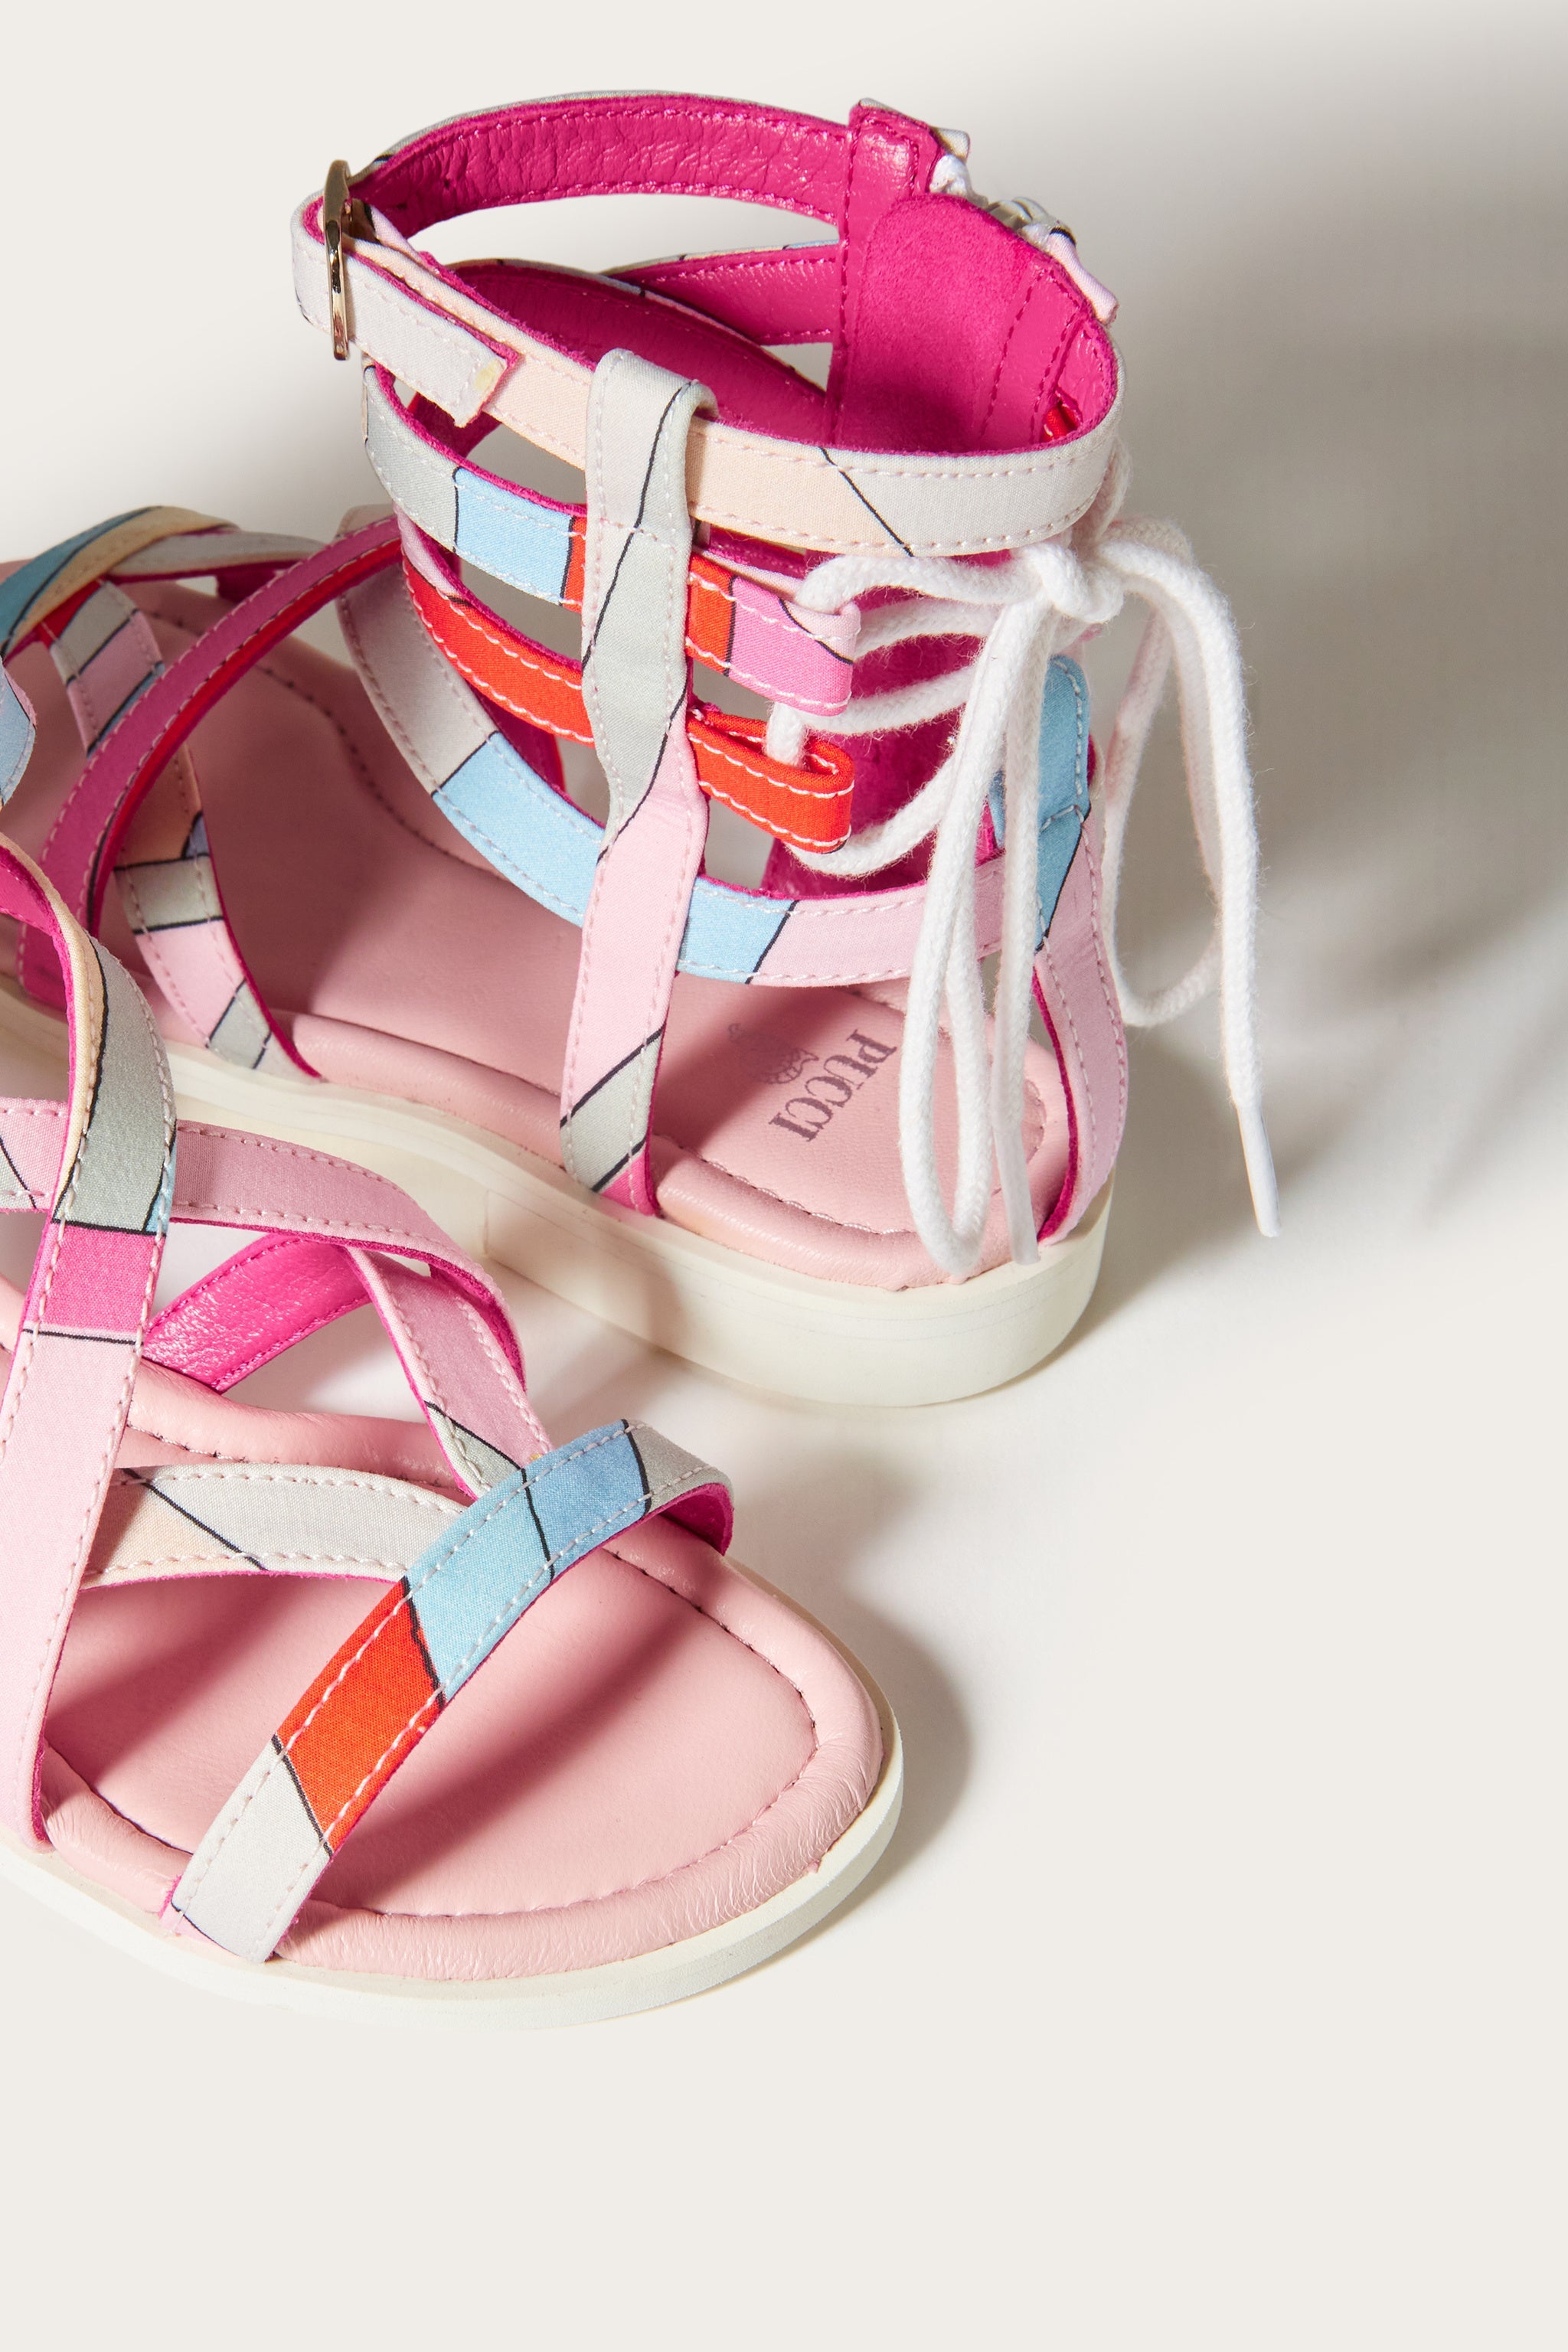 Pucci accessories kid: luxury accessories for kids | Pucci